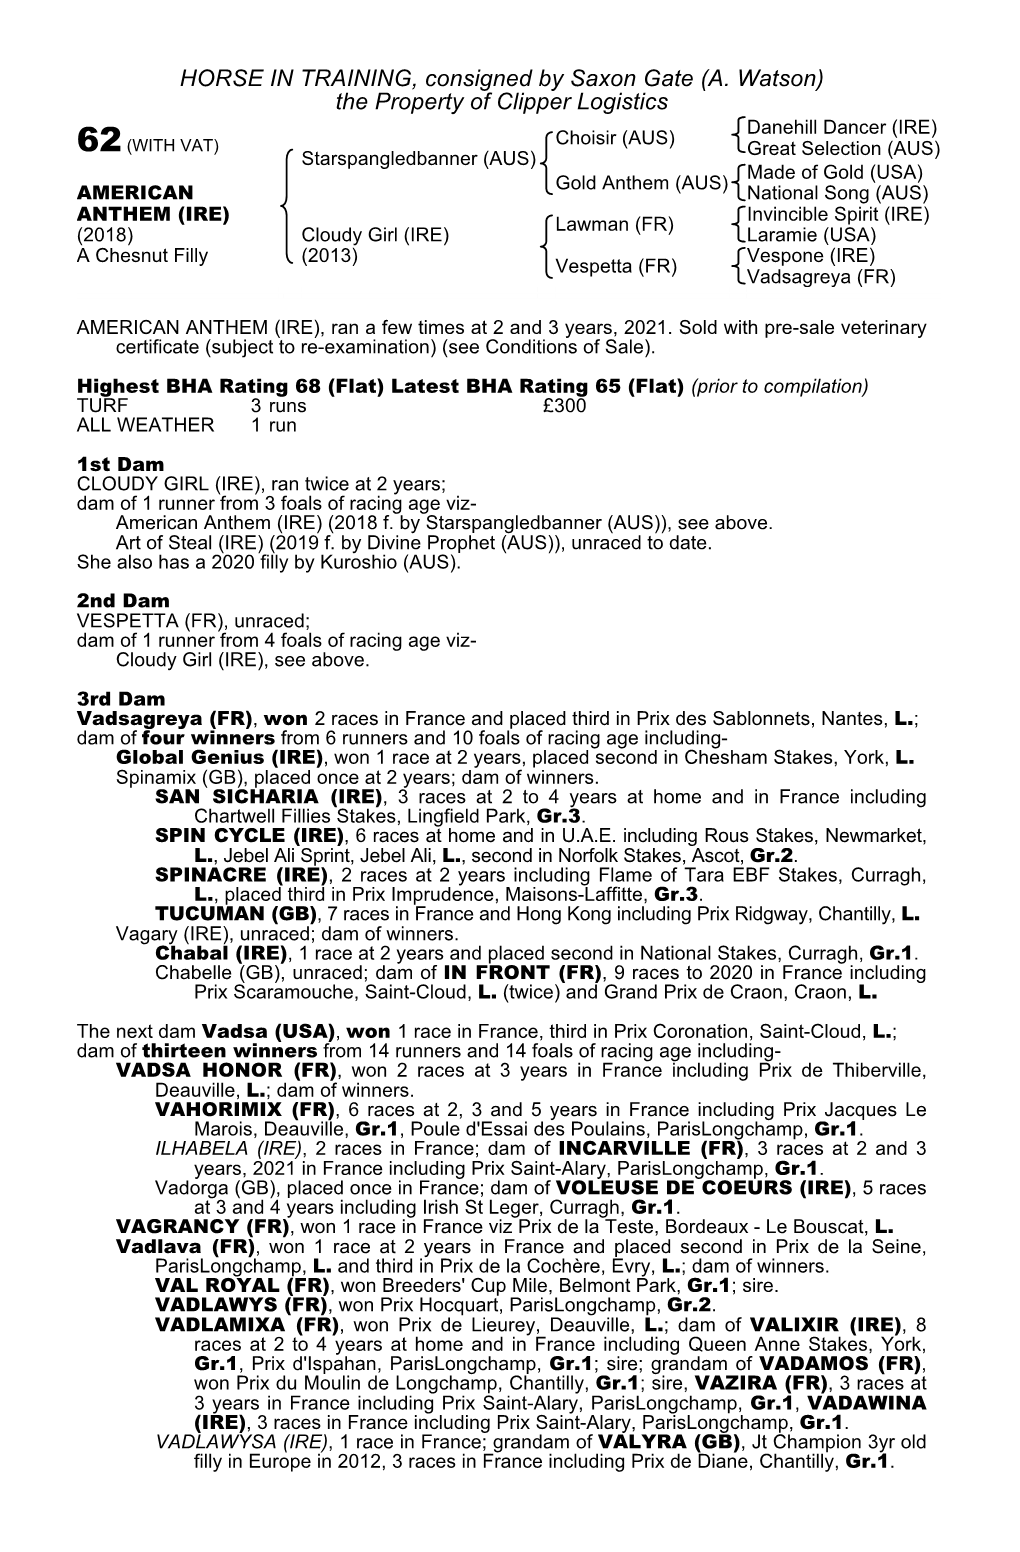 HORSE in TRAINING, Consigned by Saxon Gate (A. Watson) The